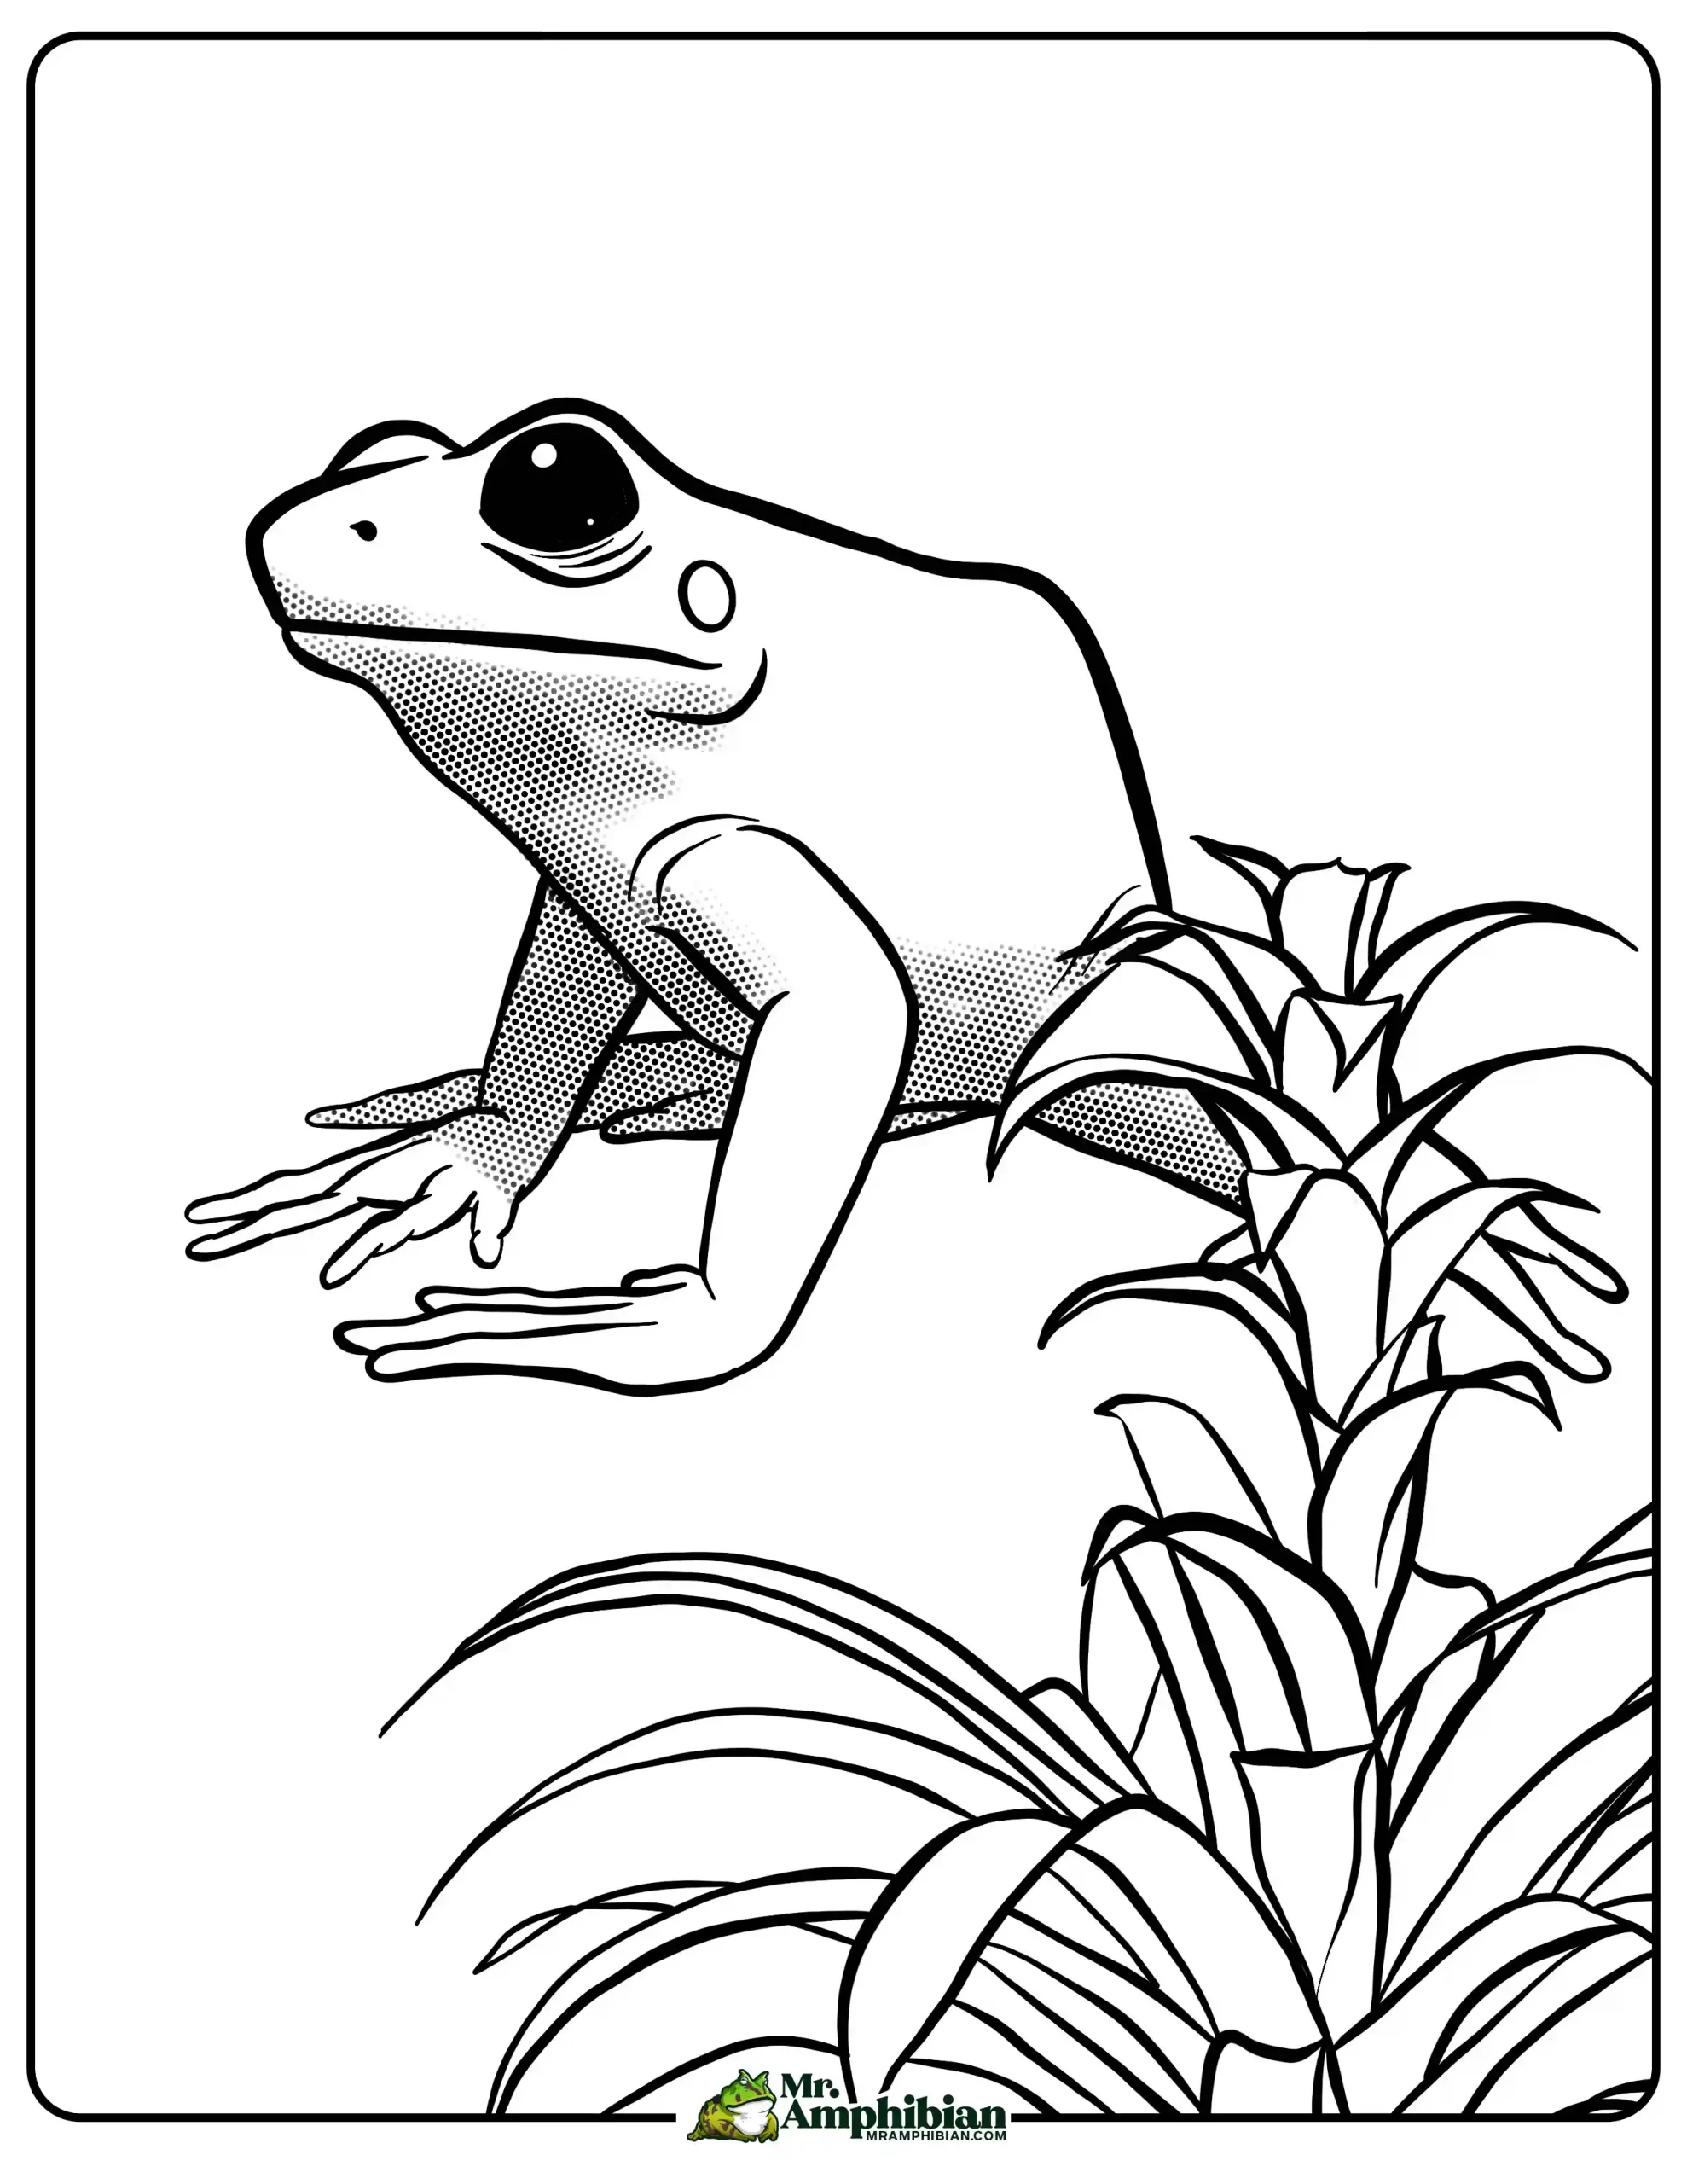 Frog coloring pages printable